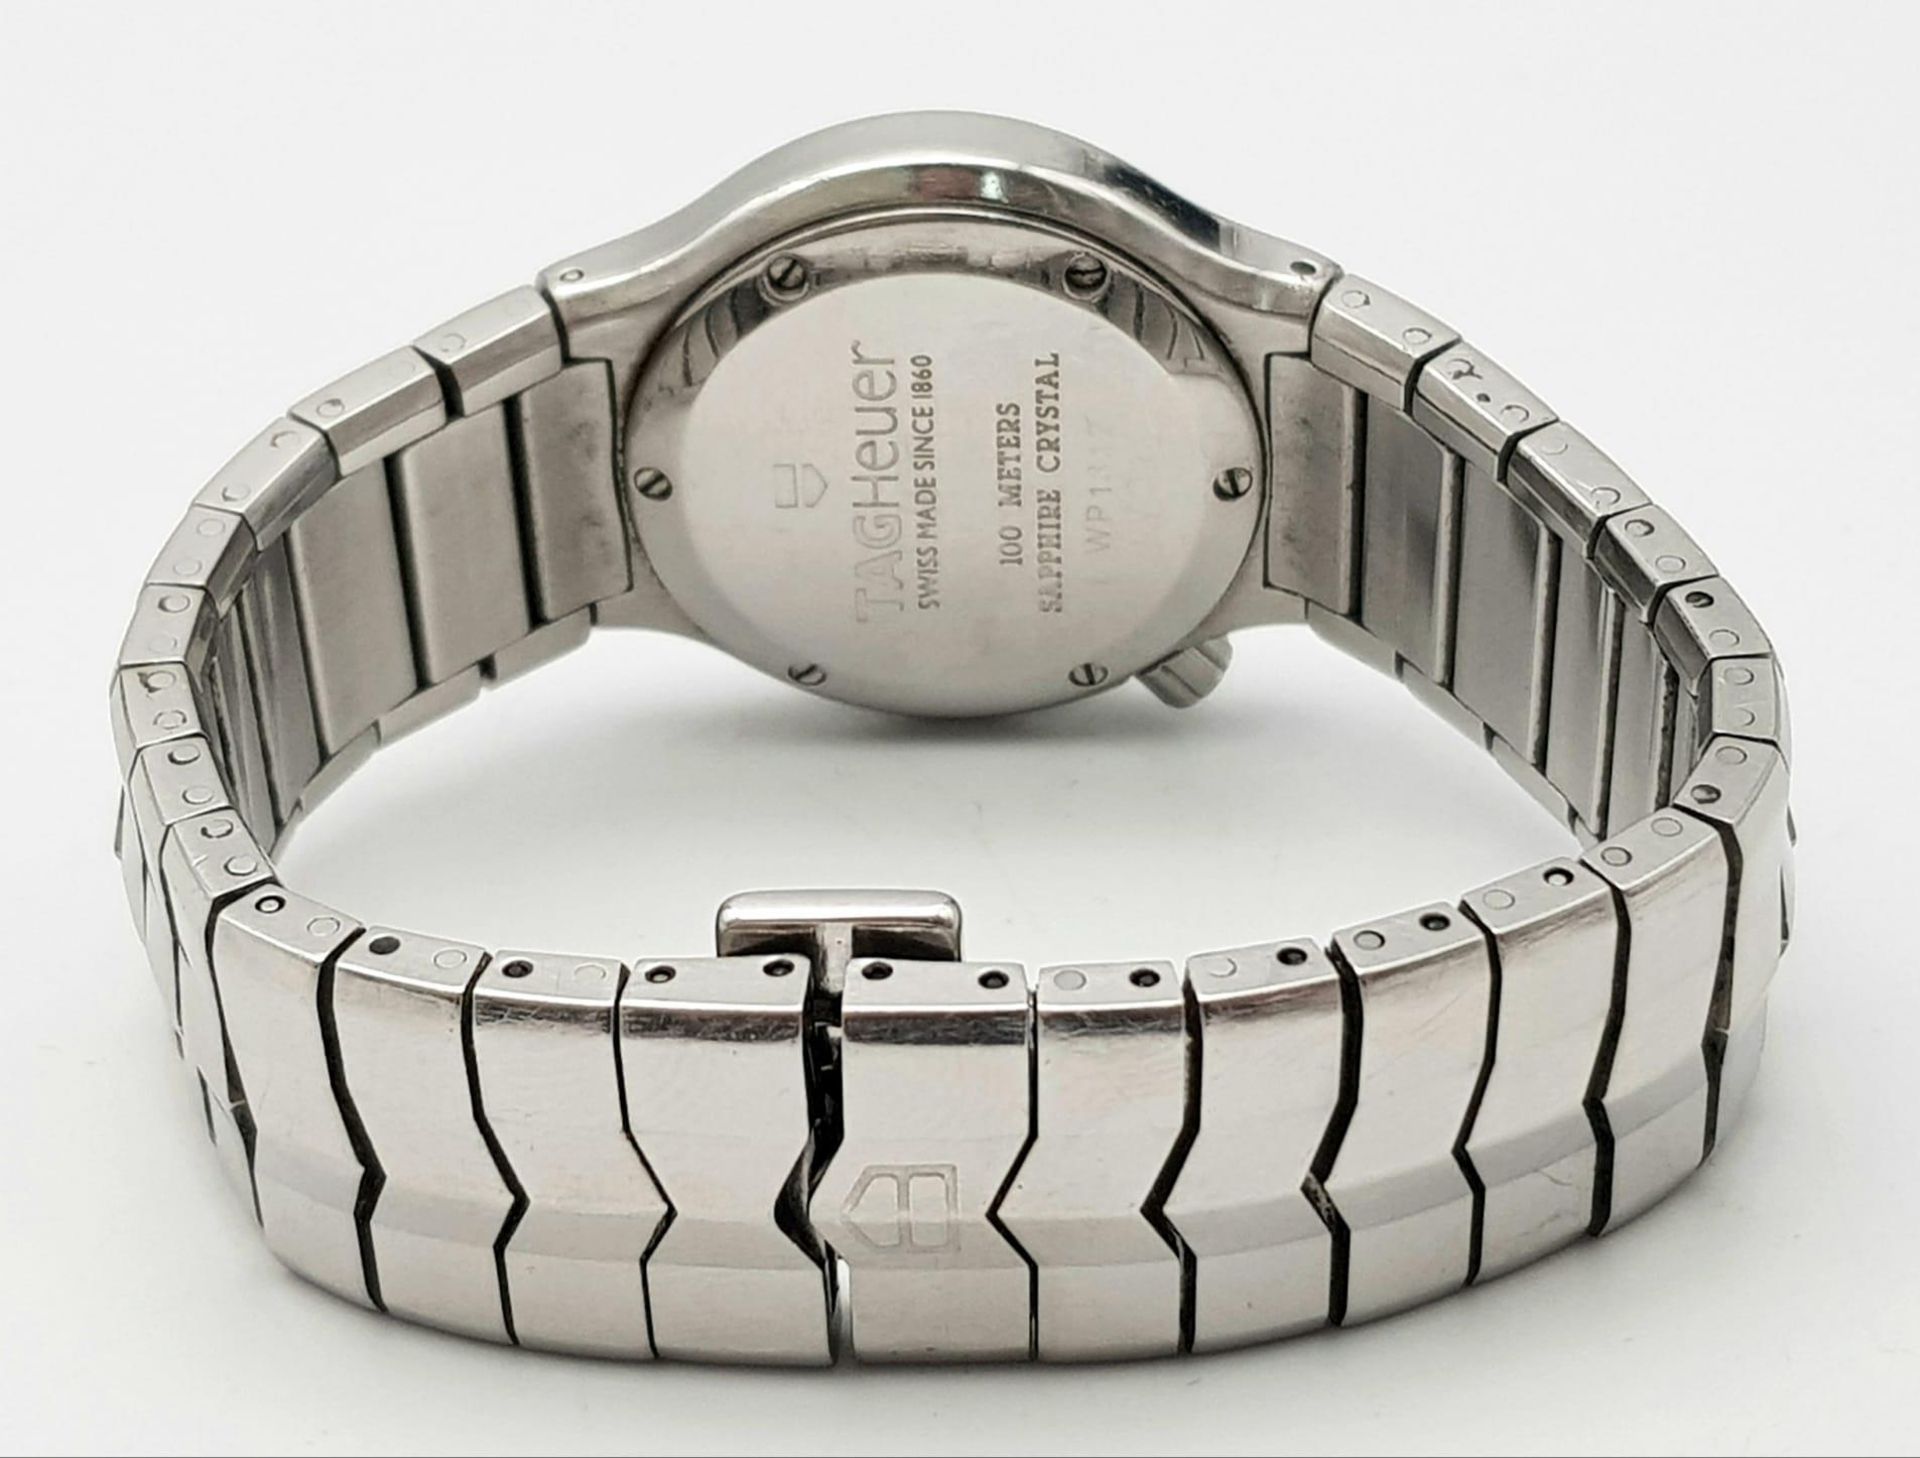 A Tag Heuer Alter Ego Quartz Ladies Watch. Stainless steel bracelet and case - 29mm. Mother of pearl - Image 5 of 7